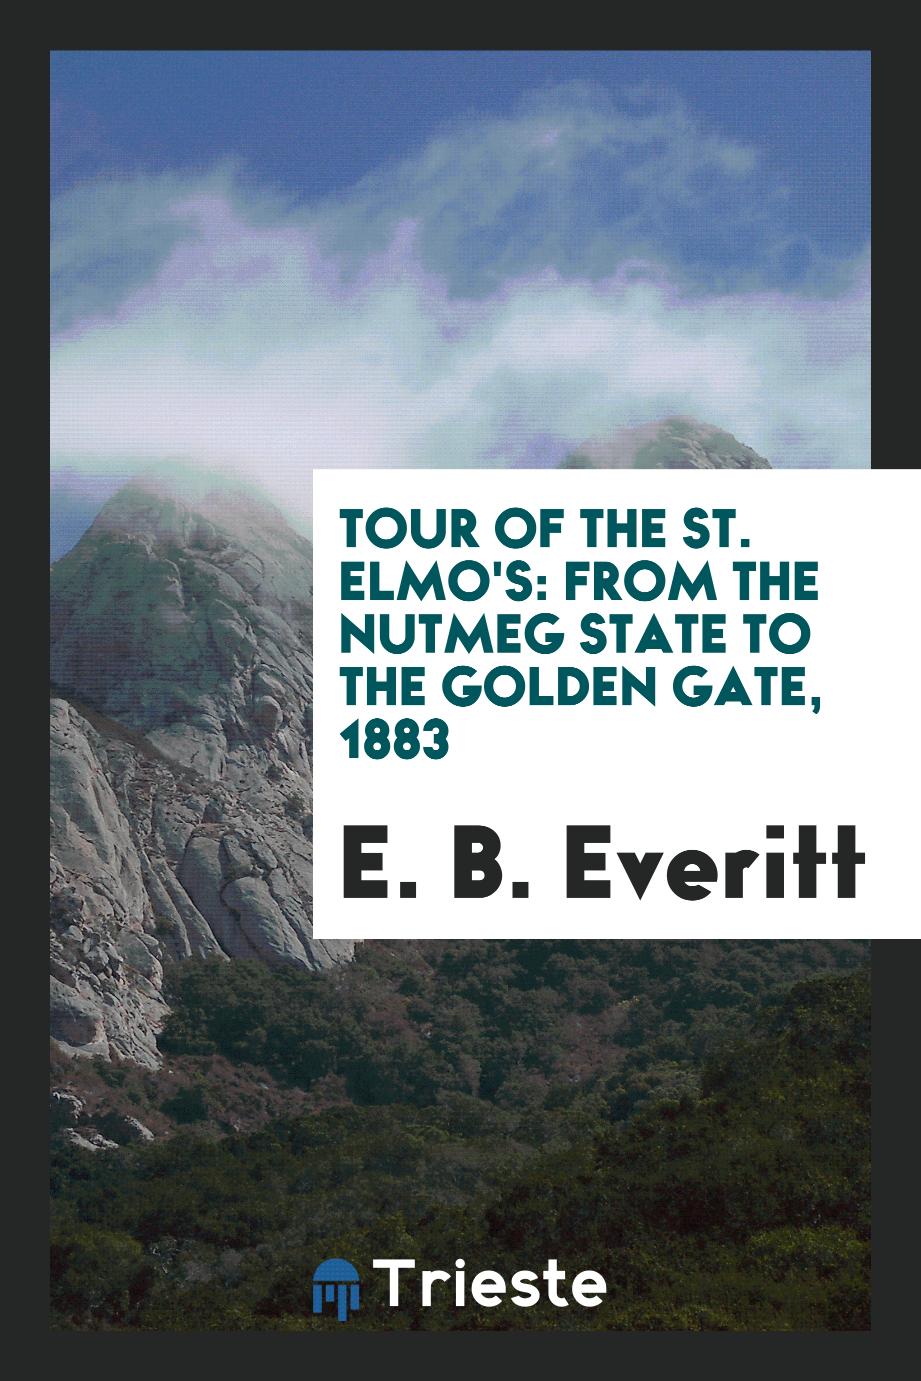 Tour of the St. Elmo's: from the Nutmeg state to the Golden Gate, 1883